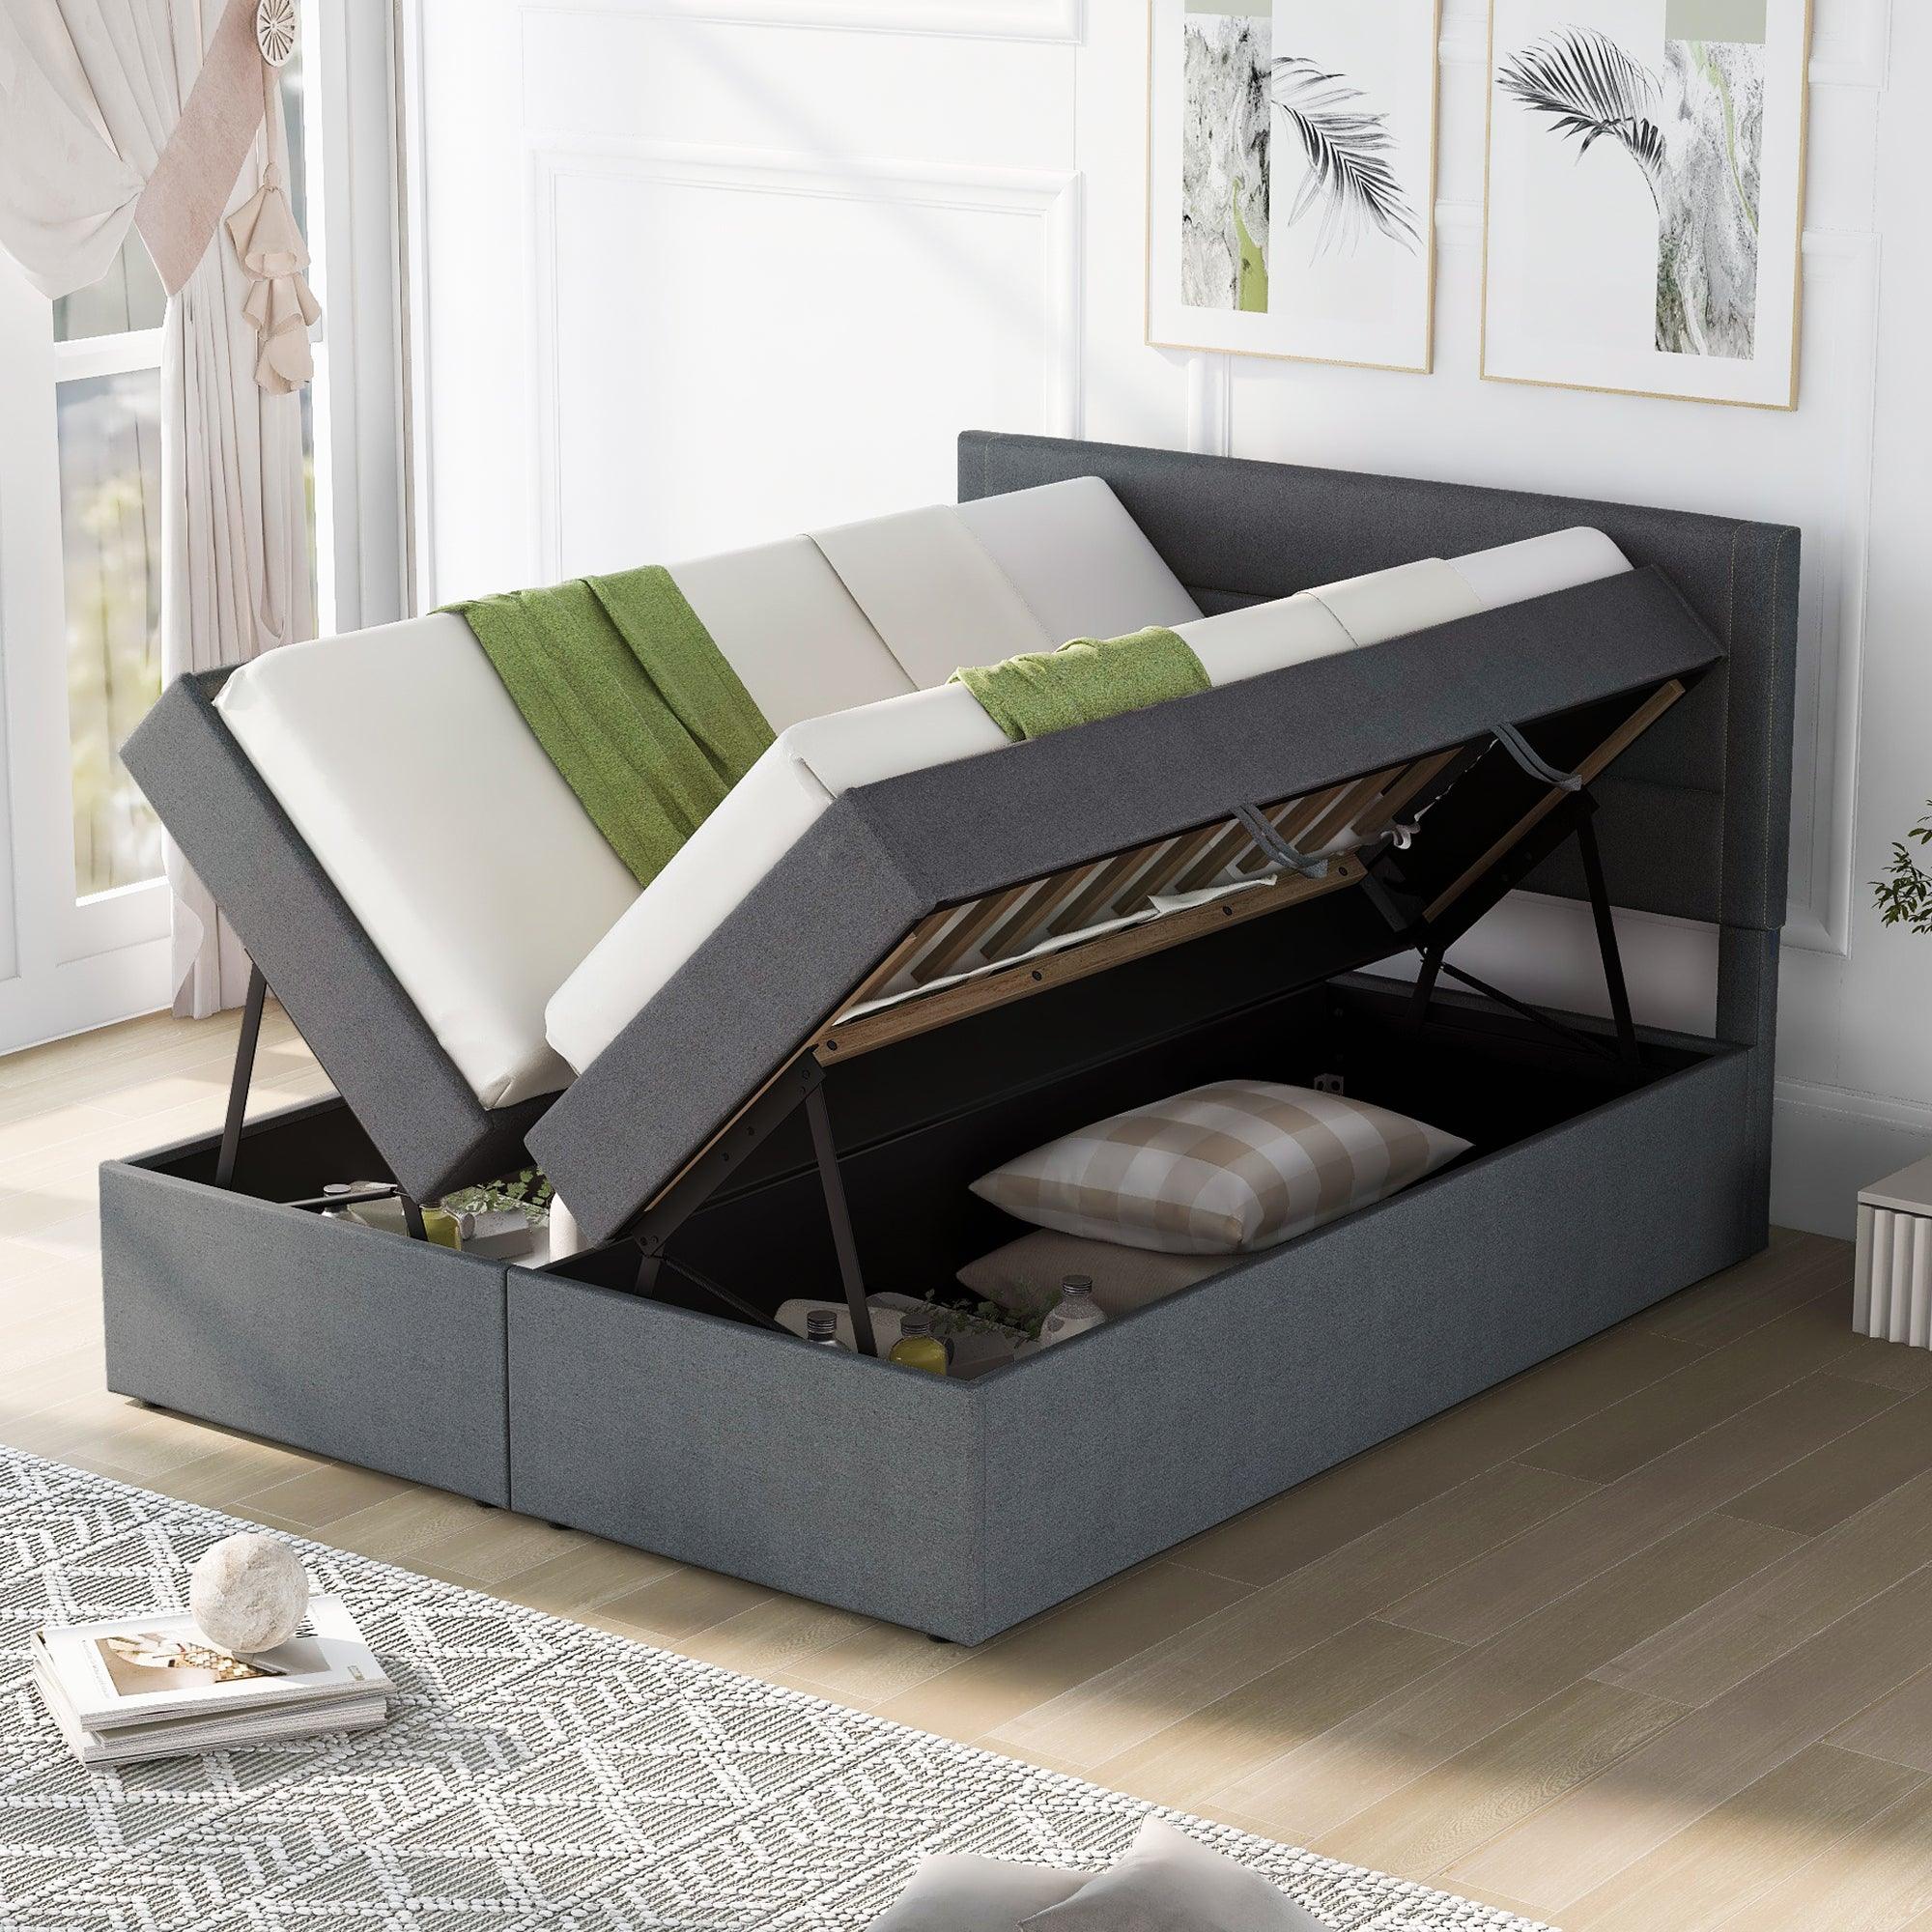 🆓🚛 Queen Size Upholstered Platform Bed With Storage Underneath, Gray